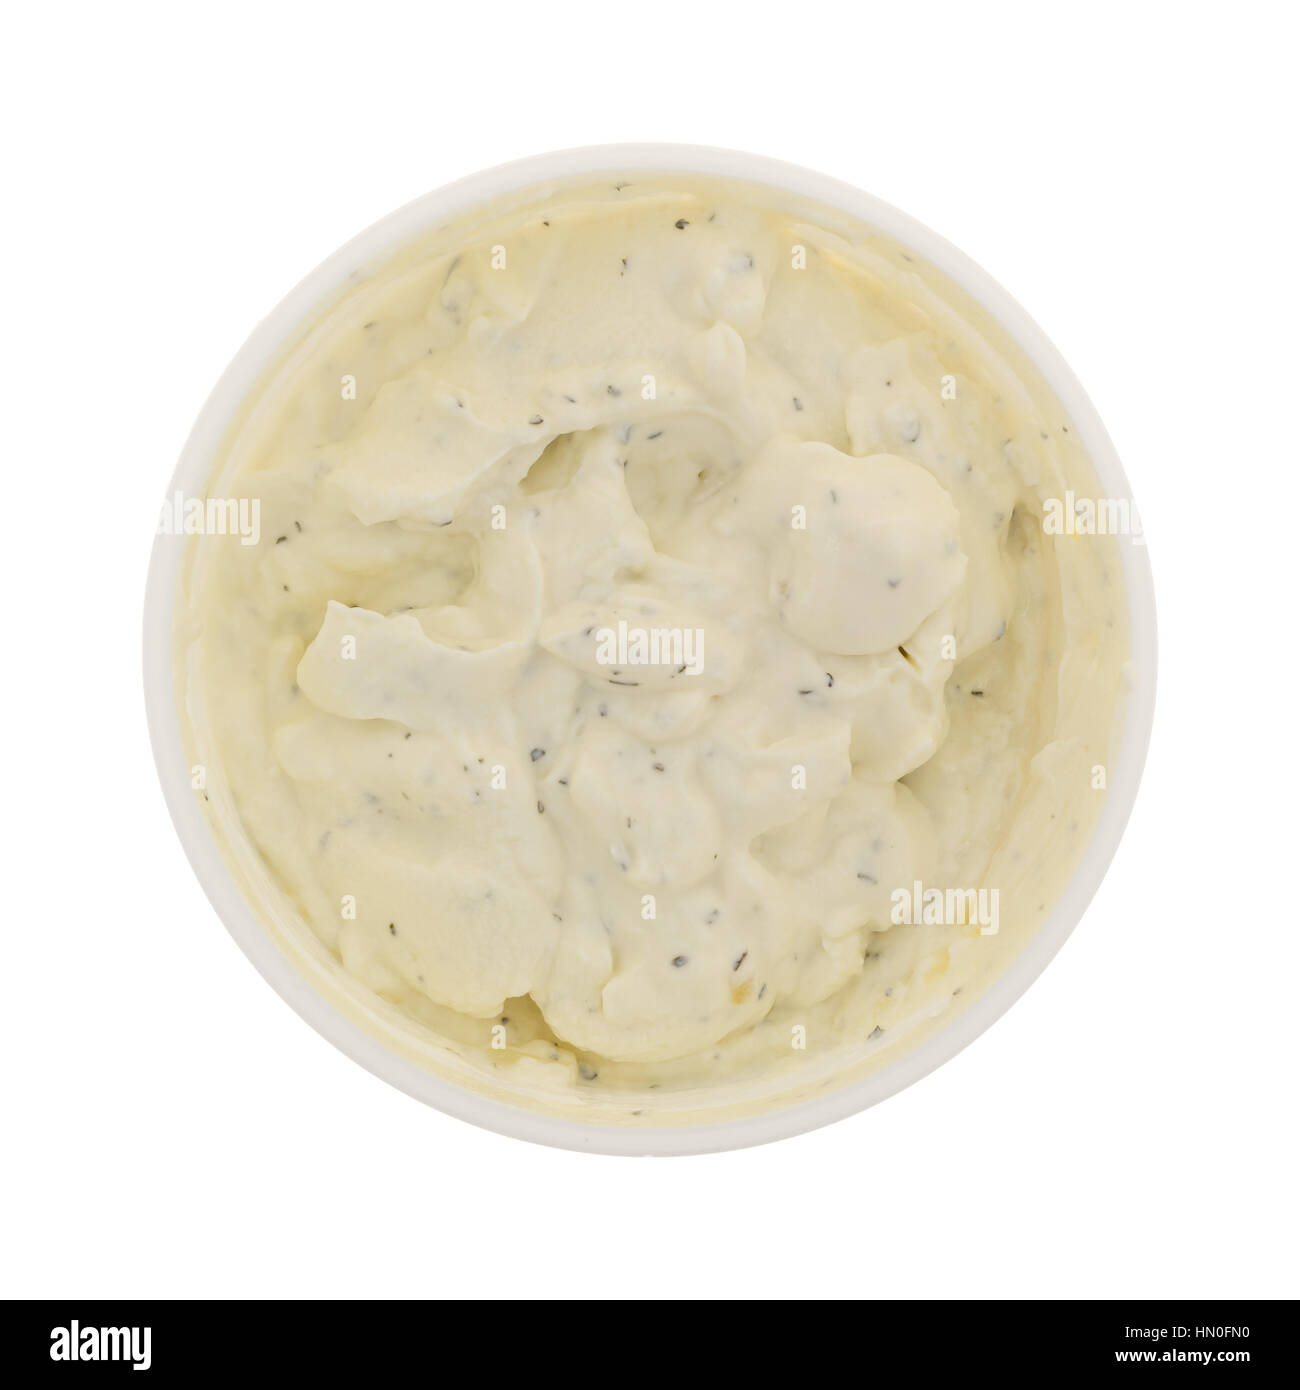 Top view of an opened container of fresh French onion dip isolated on a white background. Stock Photo